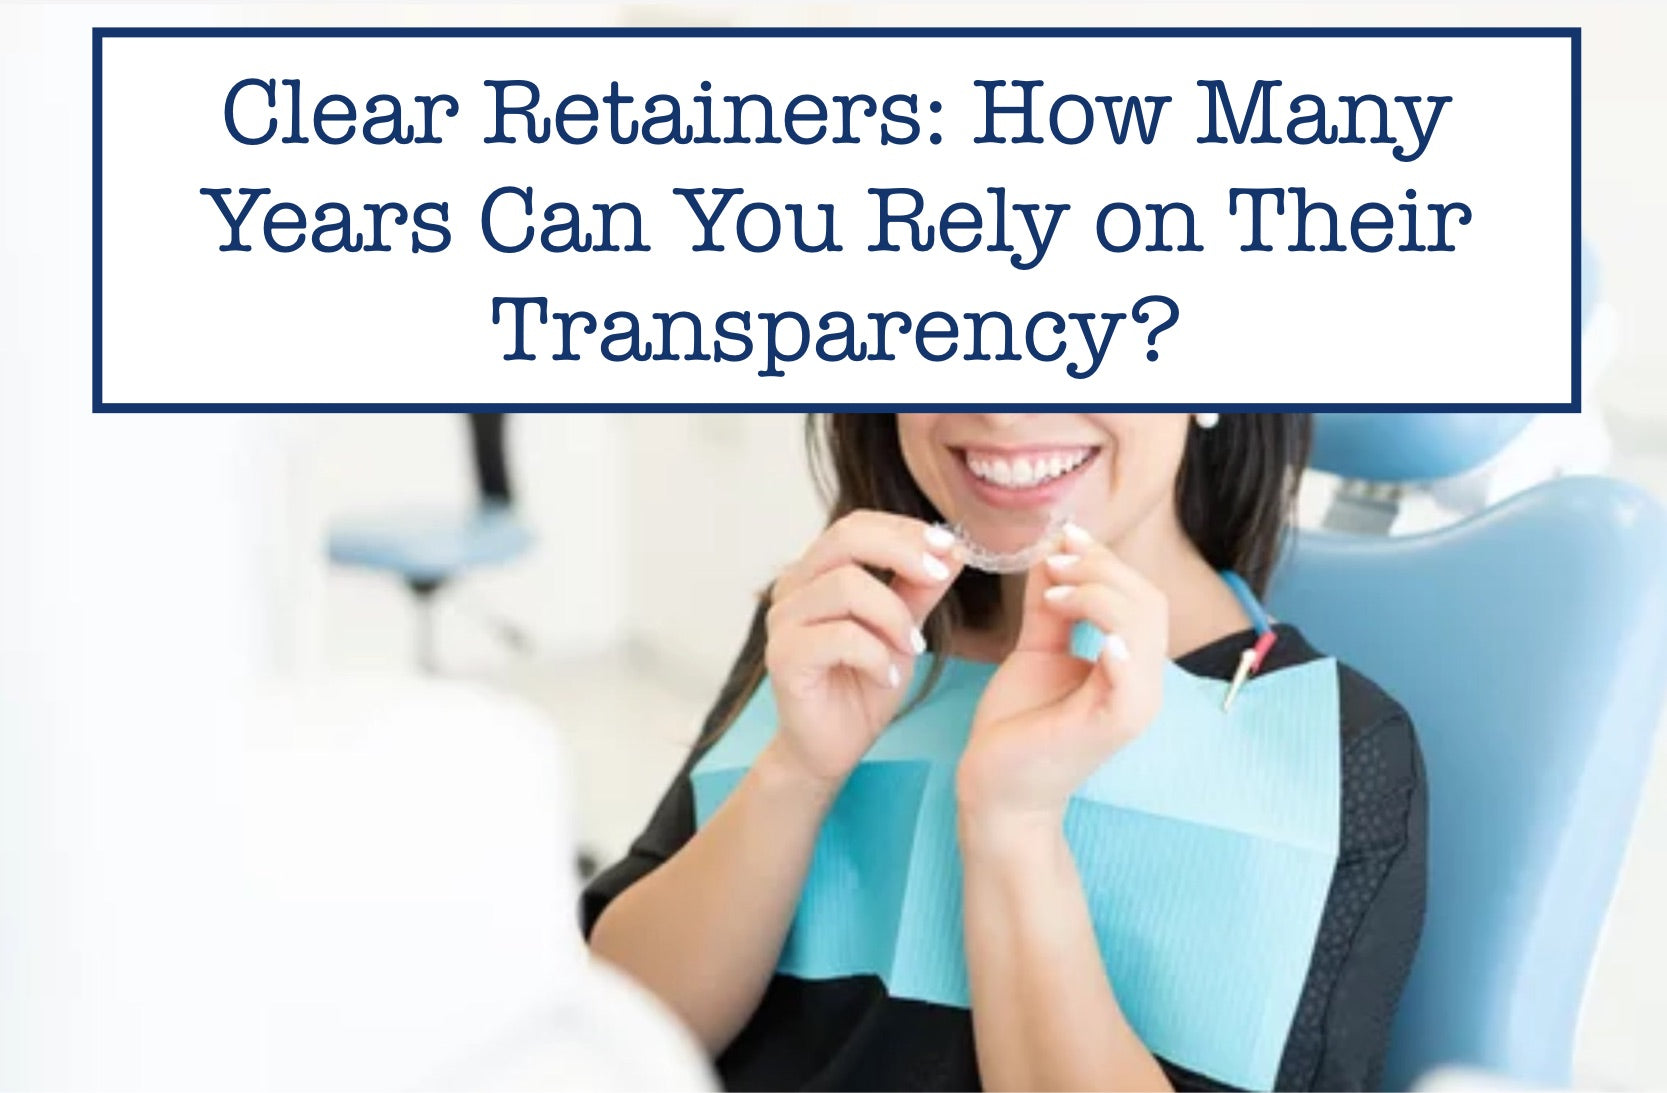 Clear Retainers: How Many Years Can You Rely on Their Transparency?